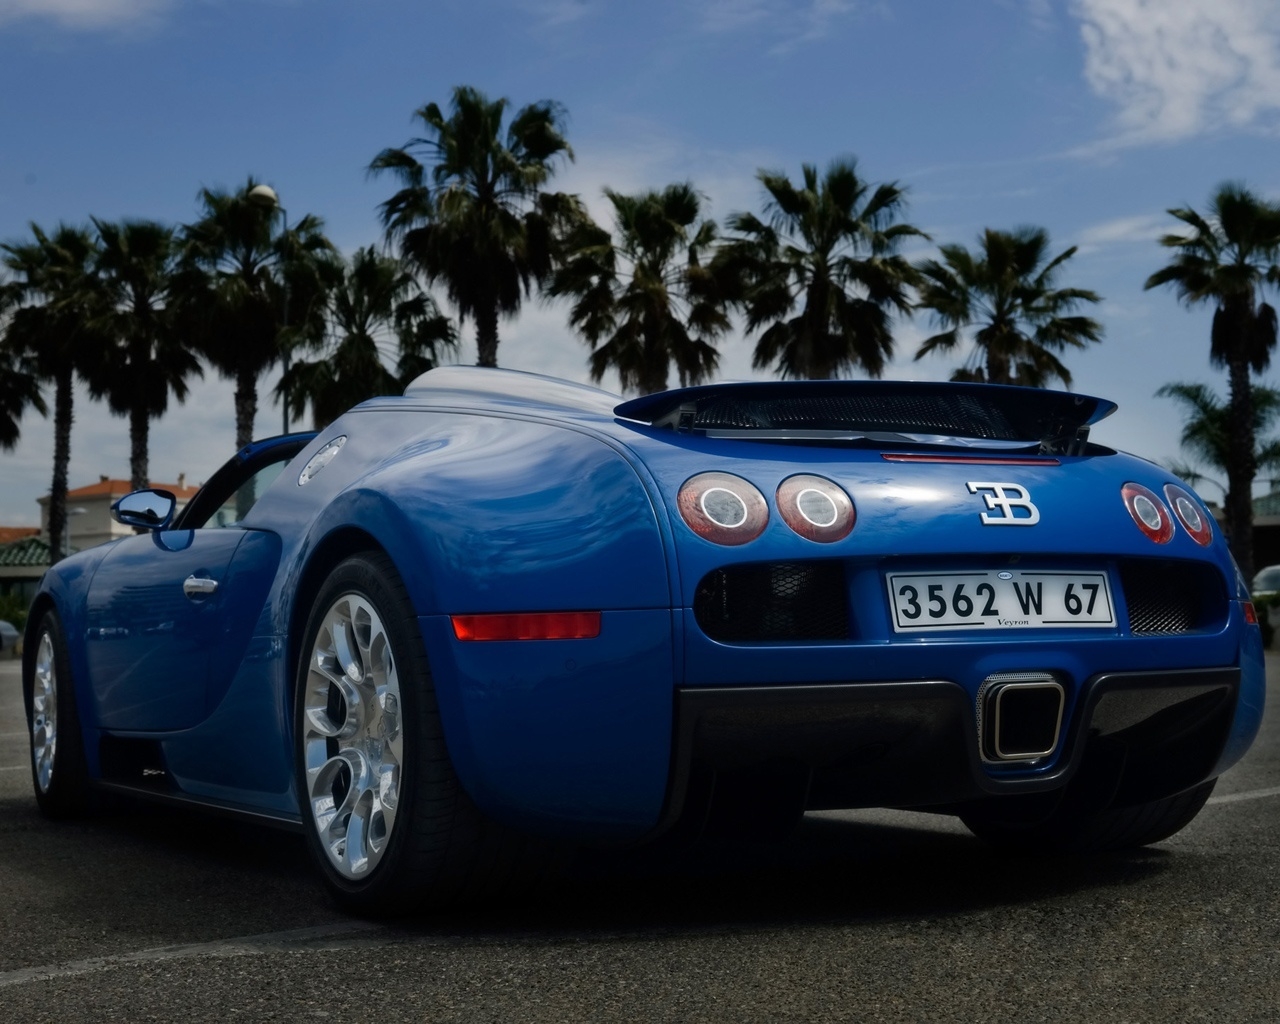 Bugatti Veyron 16.4 Grand Sport 2010 in Cannes - Rear Angle 2 for 1280 x 1024 resolution